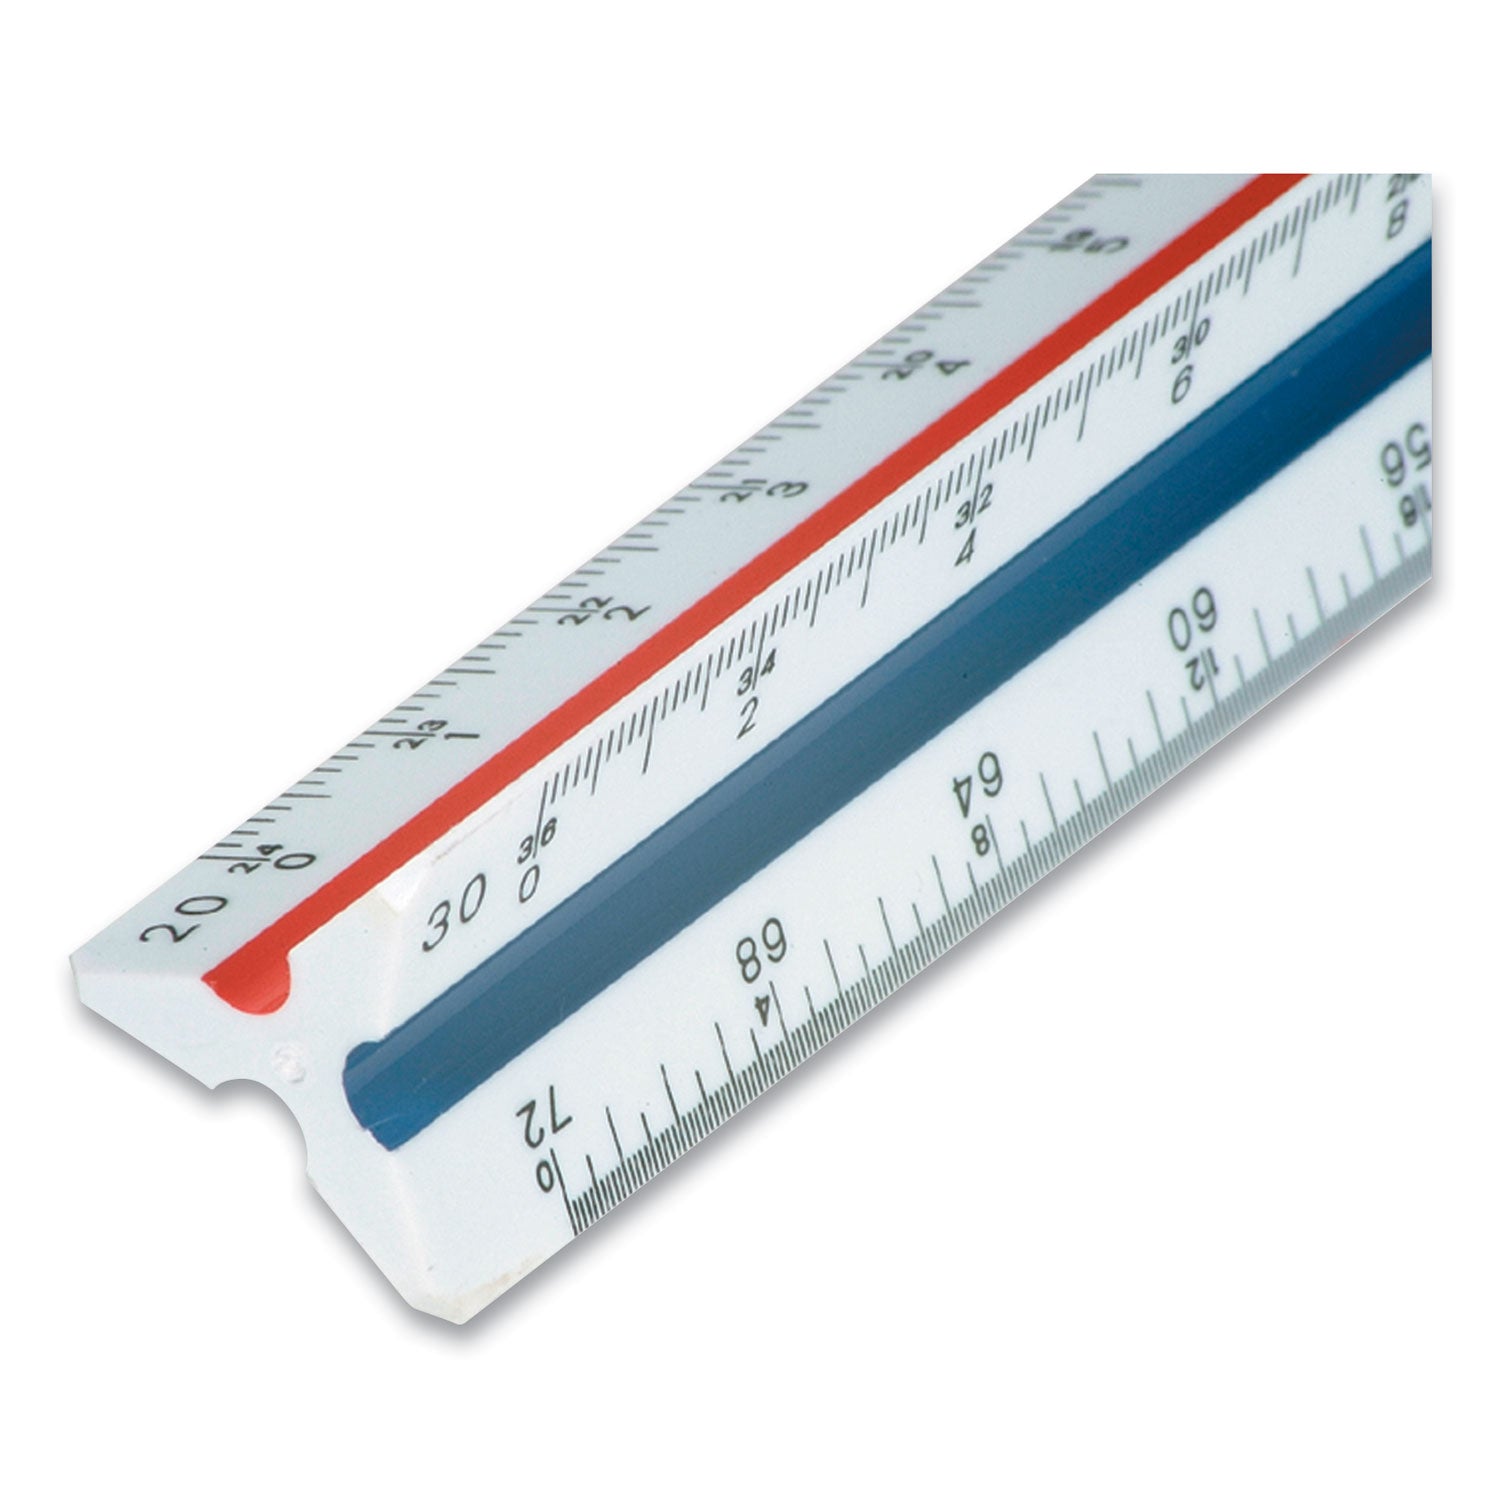 Triangular Scale Plastic Engineers Ruler, 12" Long, White with Colored Grooves - 